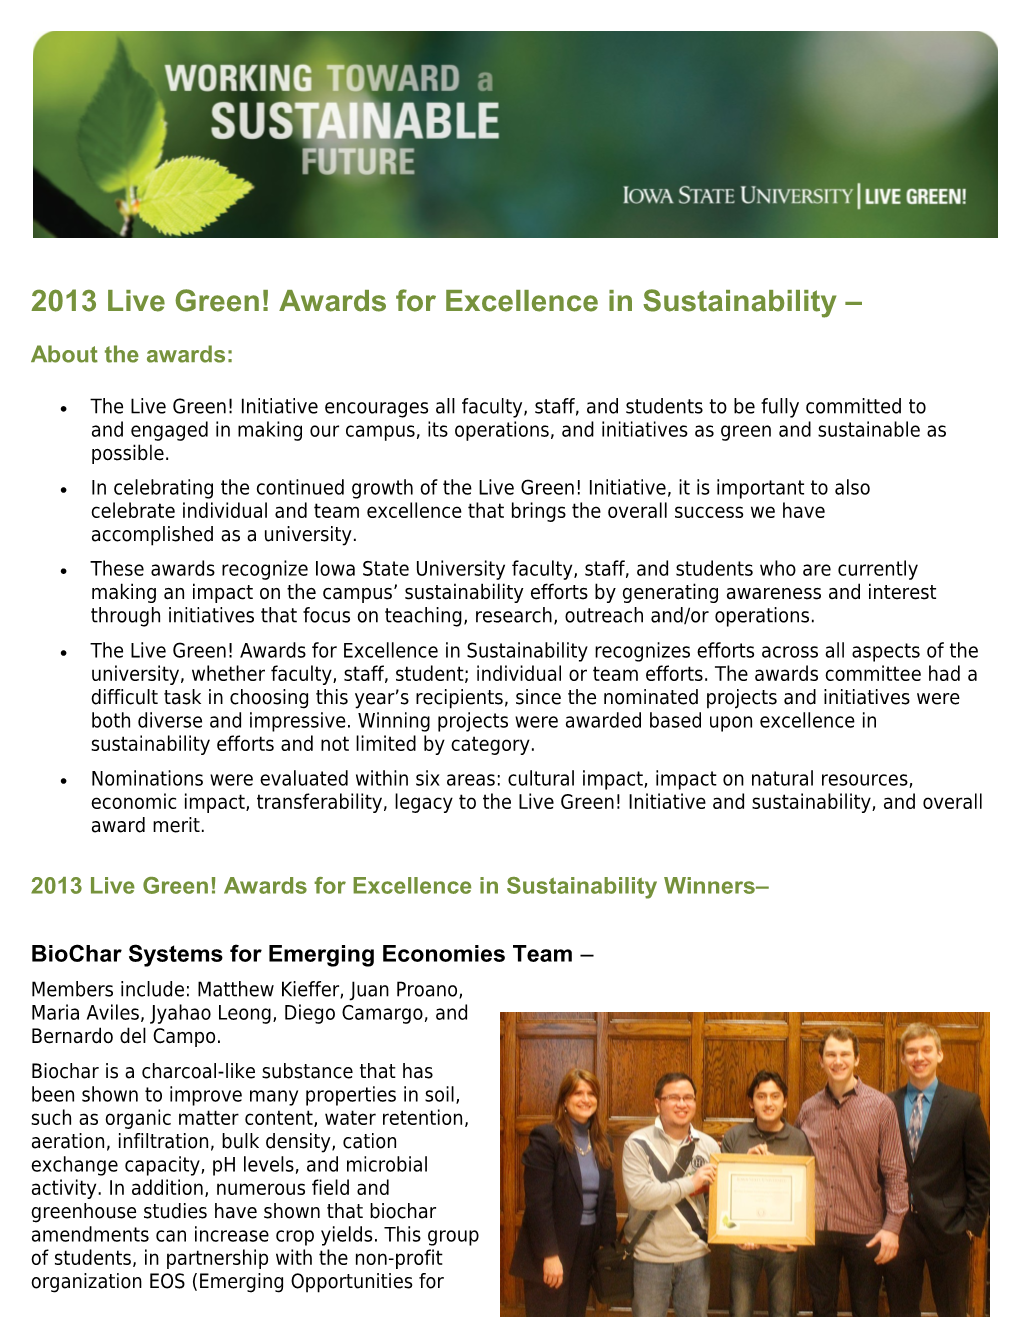 2013 Live Green! Awards for Excellence in Sustainability